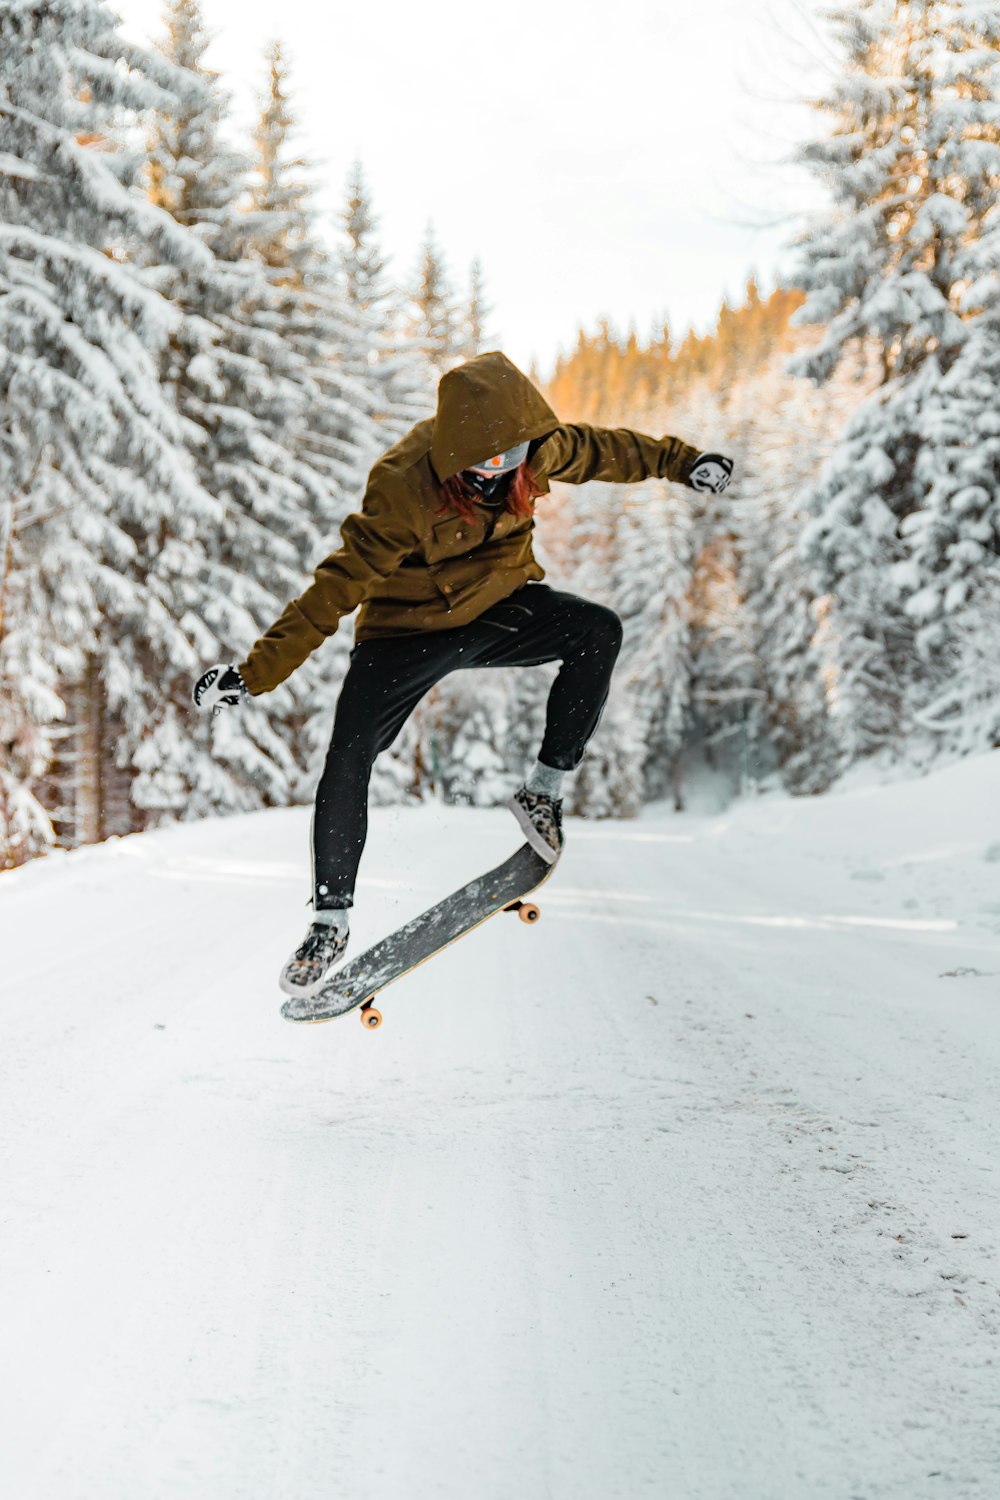 Man doing tricks on a skateboard in mid air during winter photo – Free  Austria Image on Unsplash